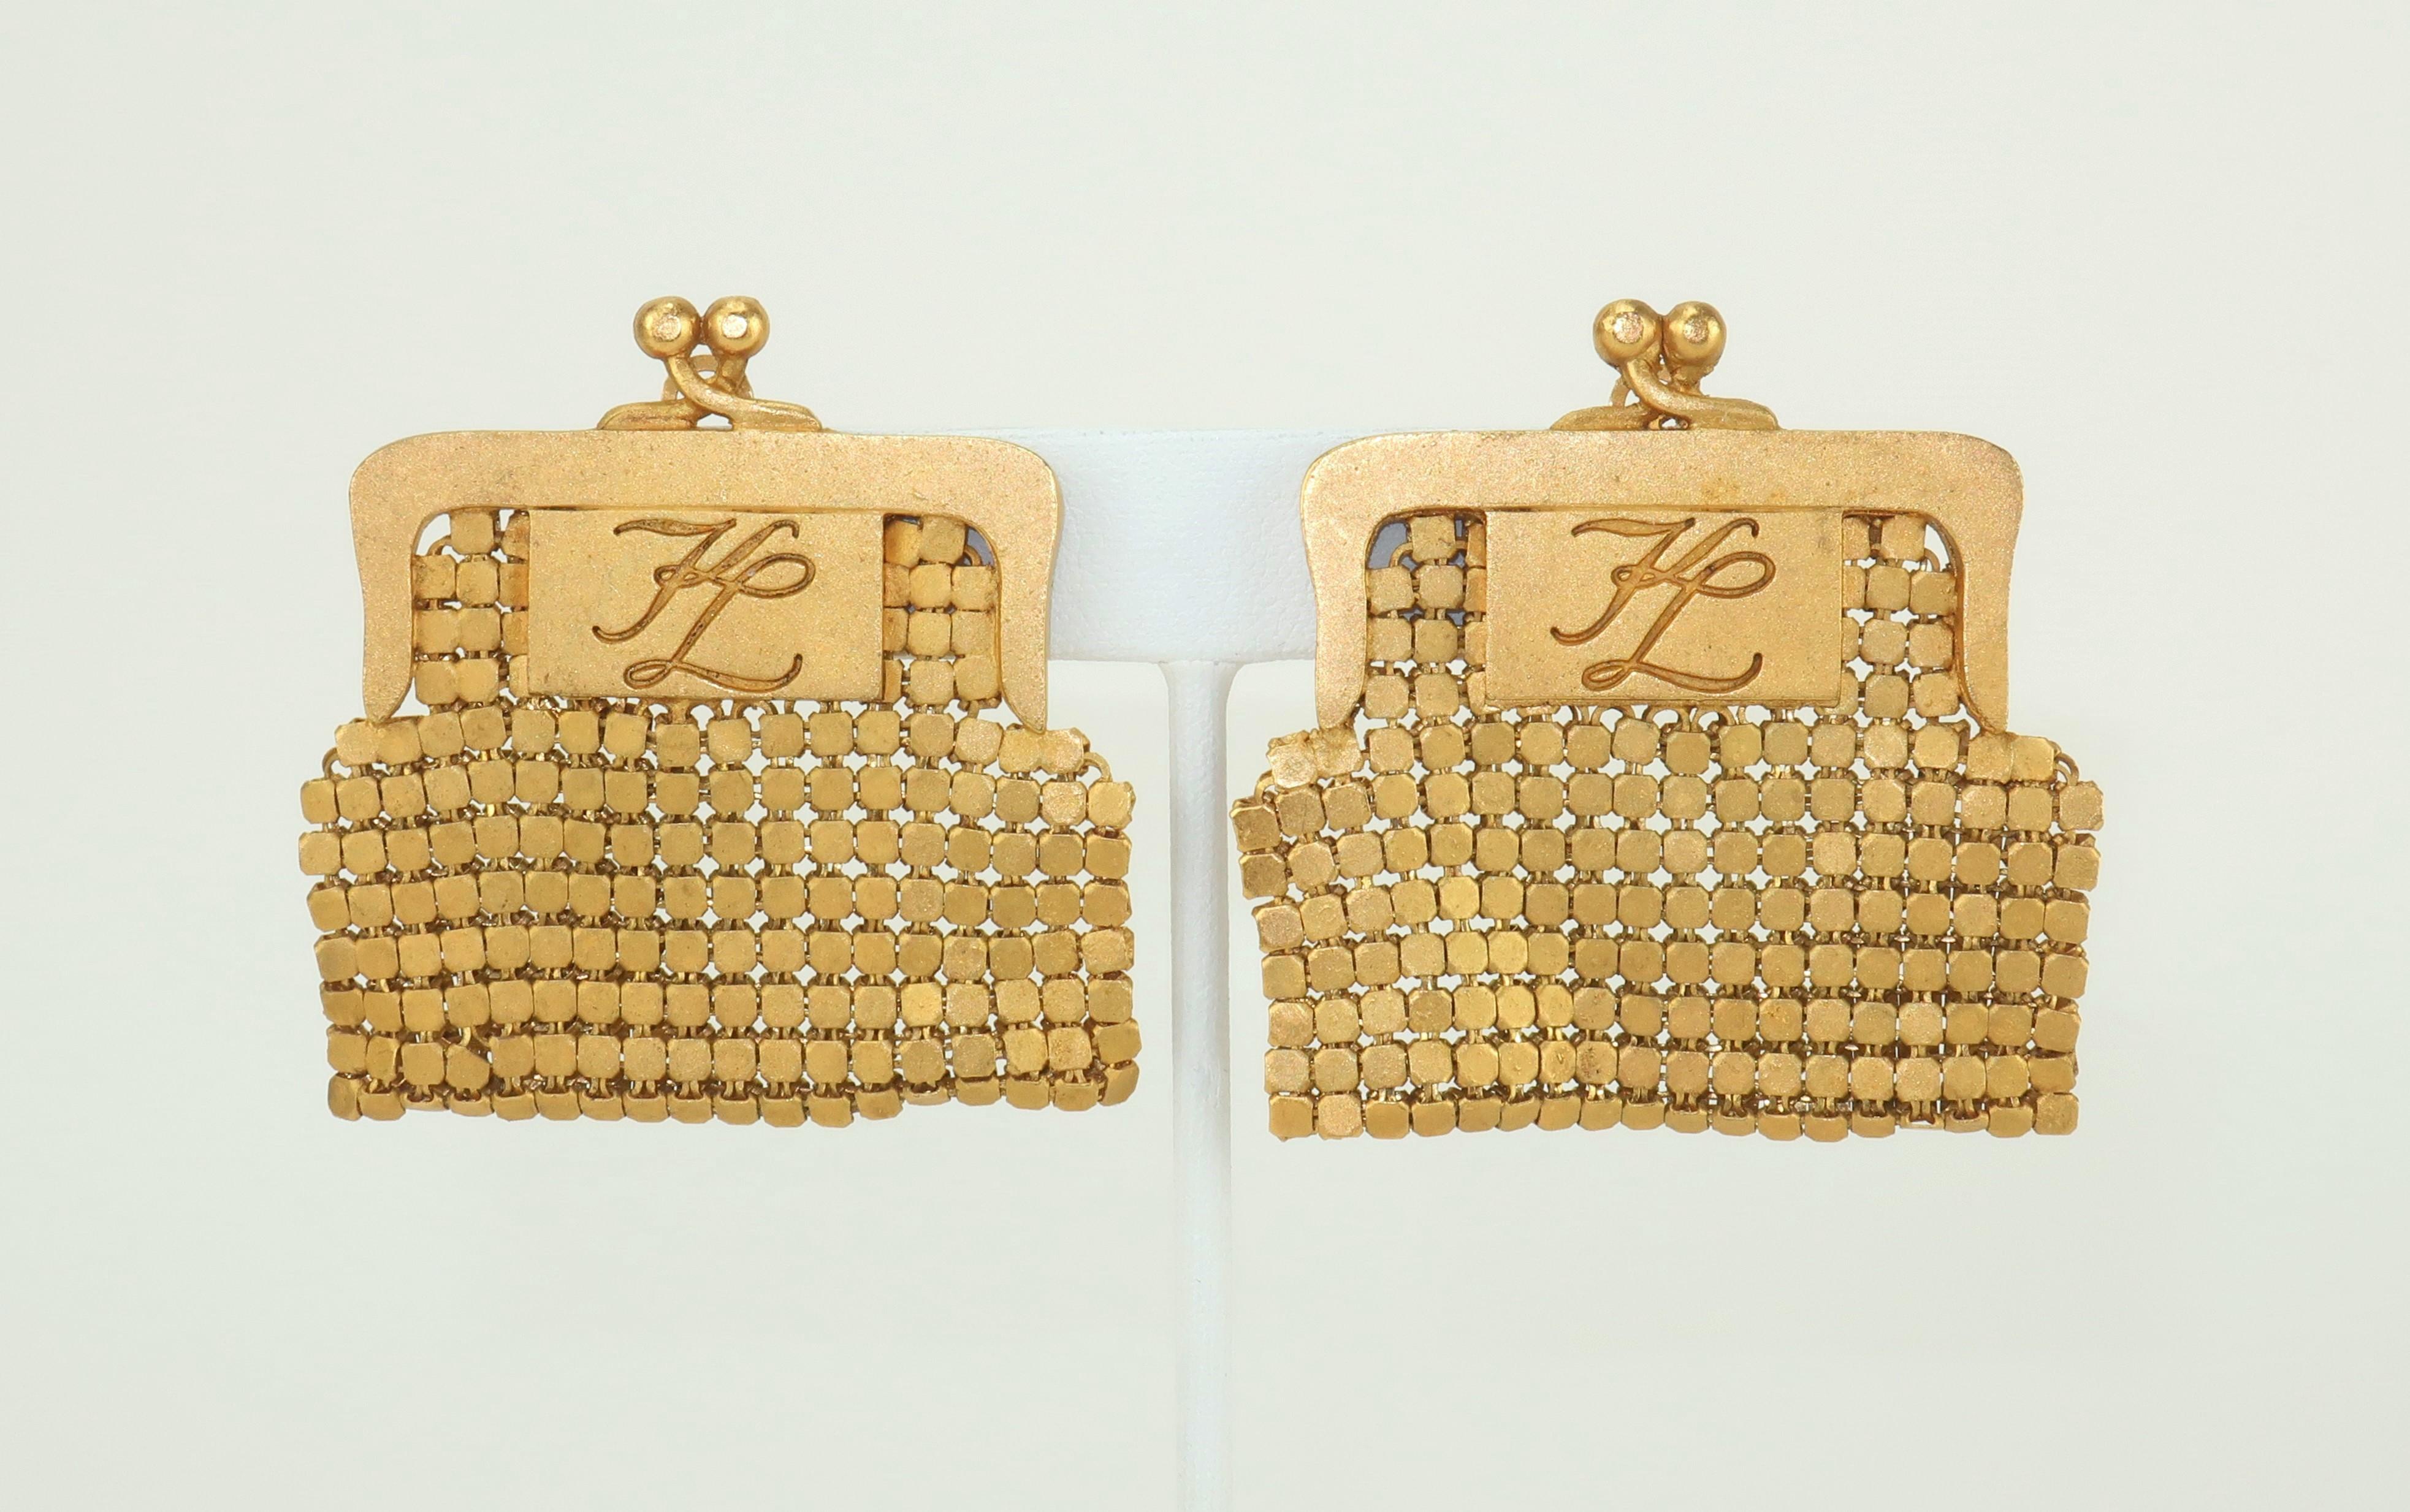 Fabulous Karl Lagerfeld clip on earrings fashioned to look like mesh coin purses … one for each ear!  The gold tone metal has a matte finish and bears the iconic ‘KL’ logo at the front and a smaller ‘KL’ hallmarked at the back.  Witty and